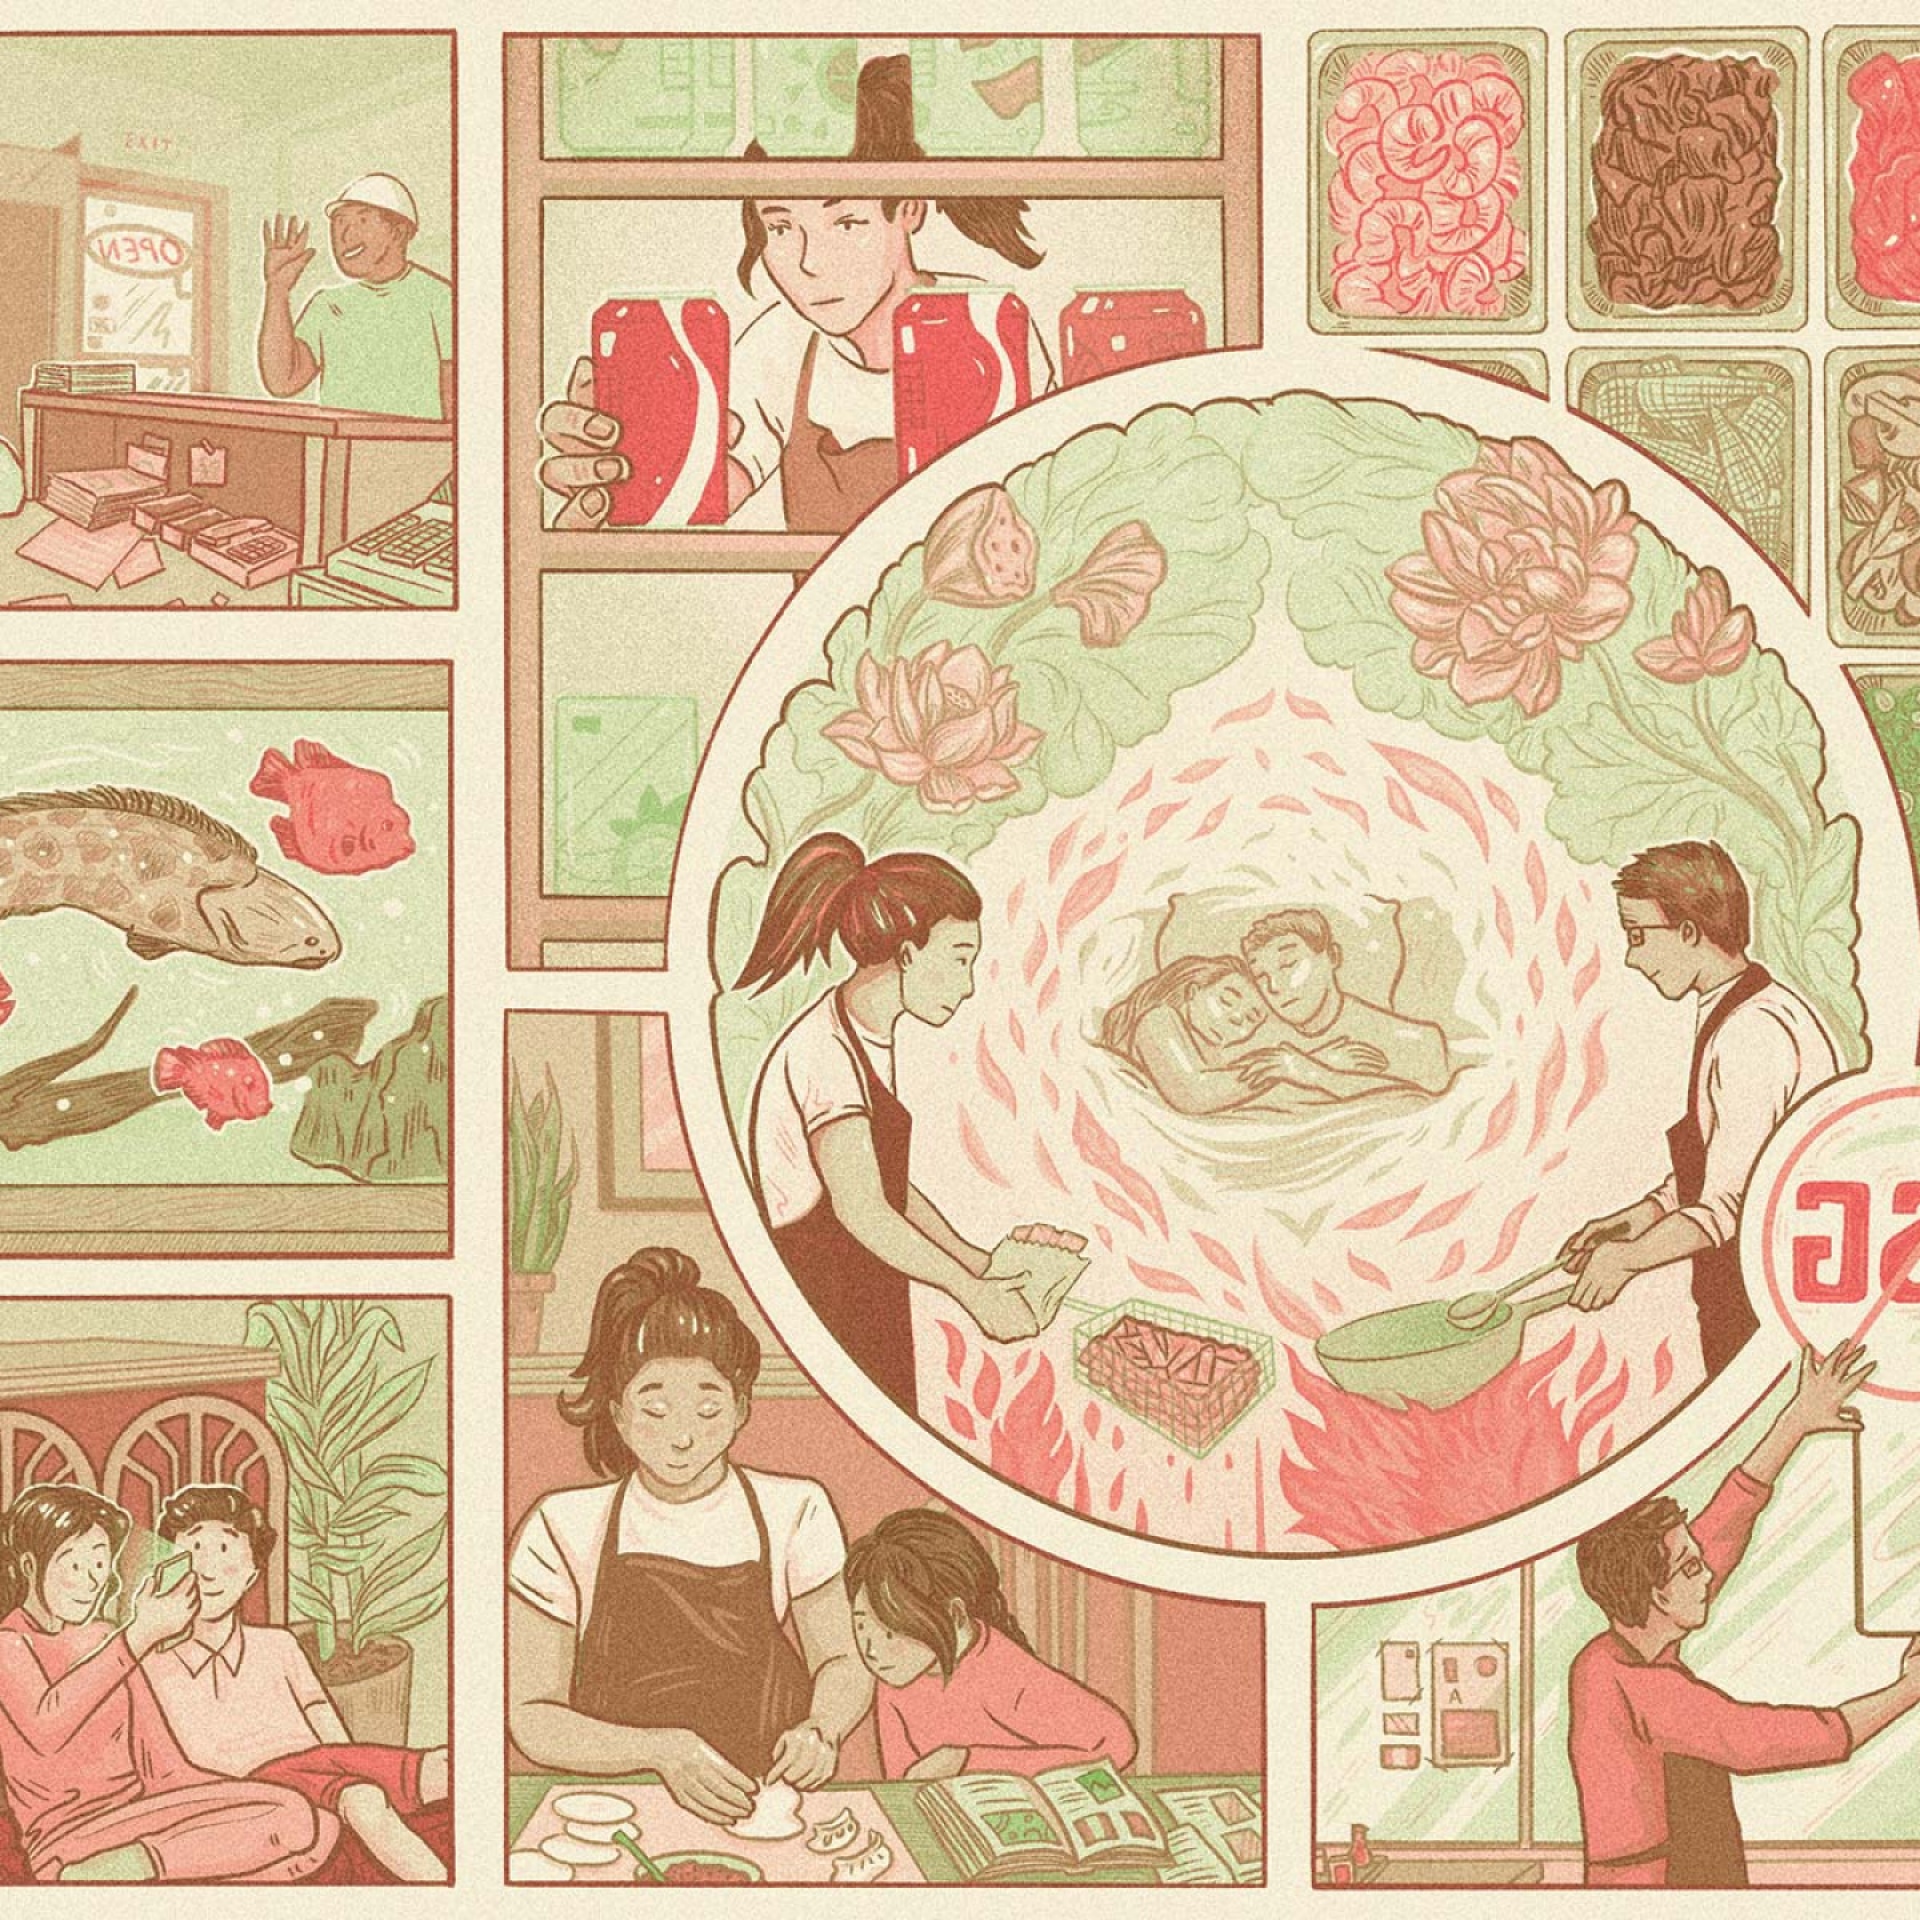 A graphic comic of a chinese takeout restaurant.